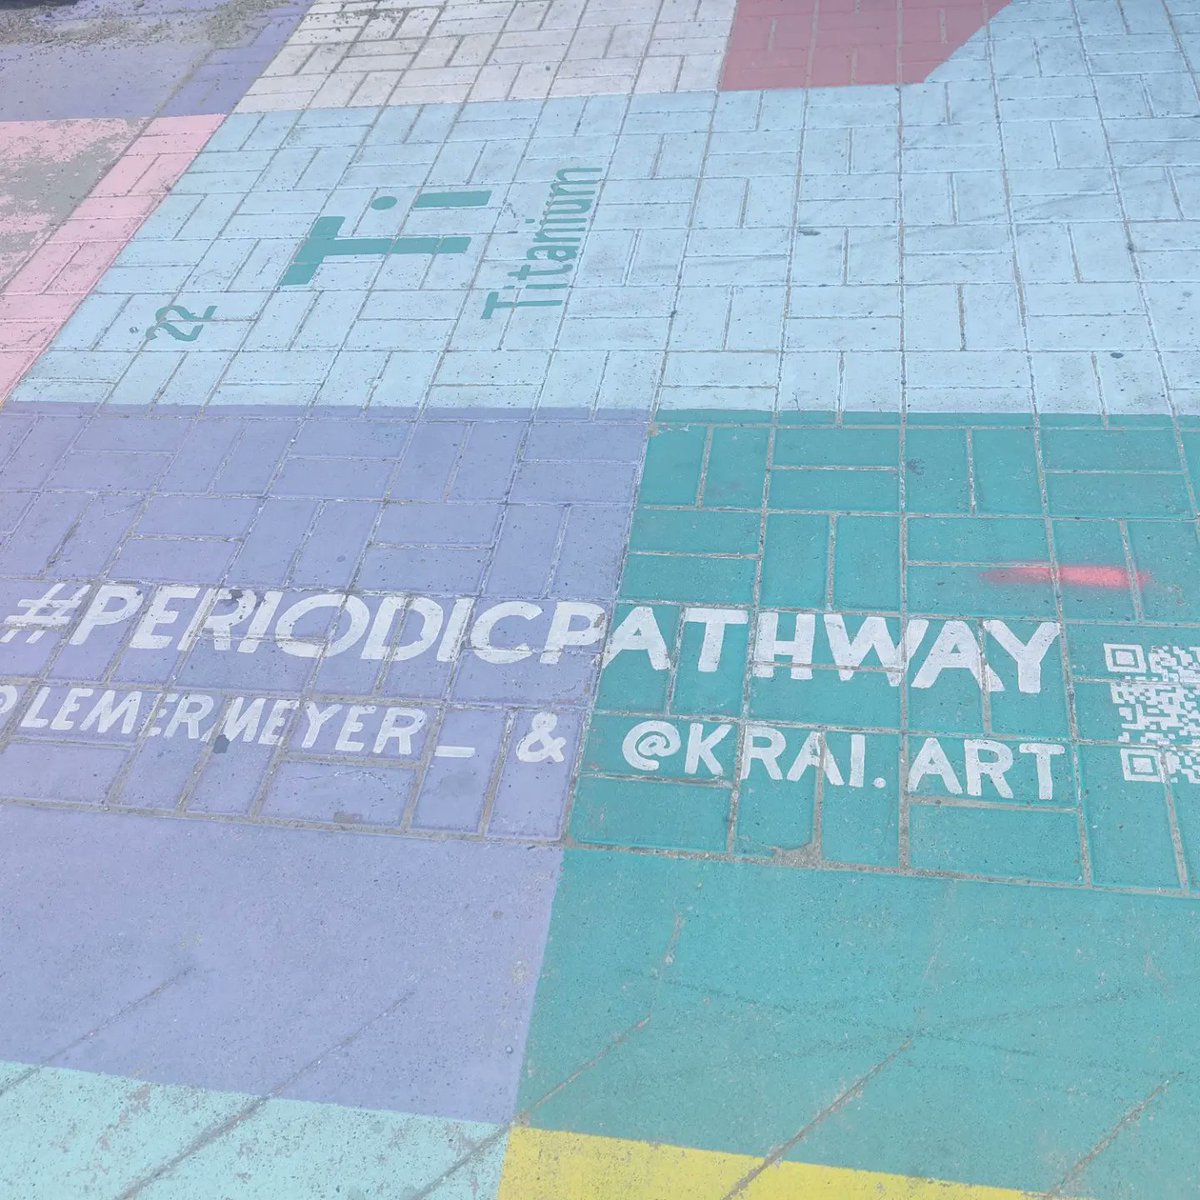 Found some periodic table sidewalk art in Calgary #CCCE2022 #periodicpathway